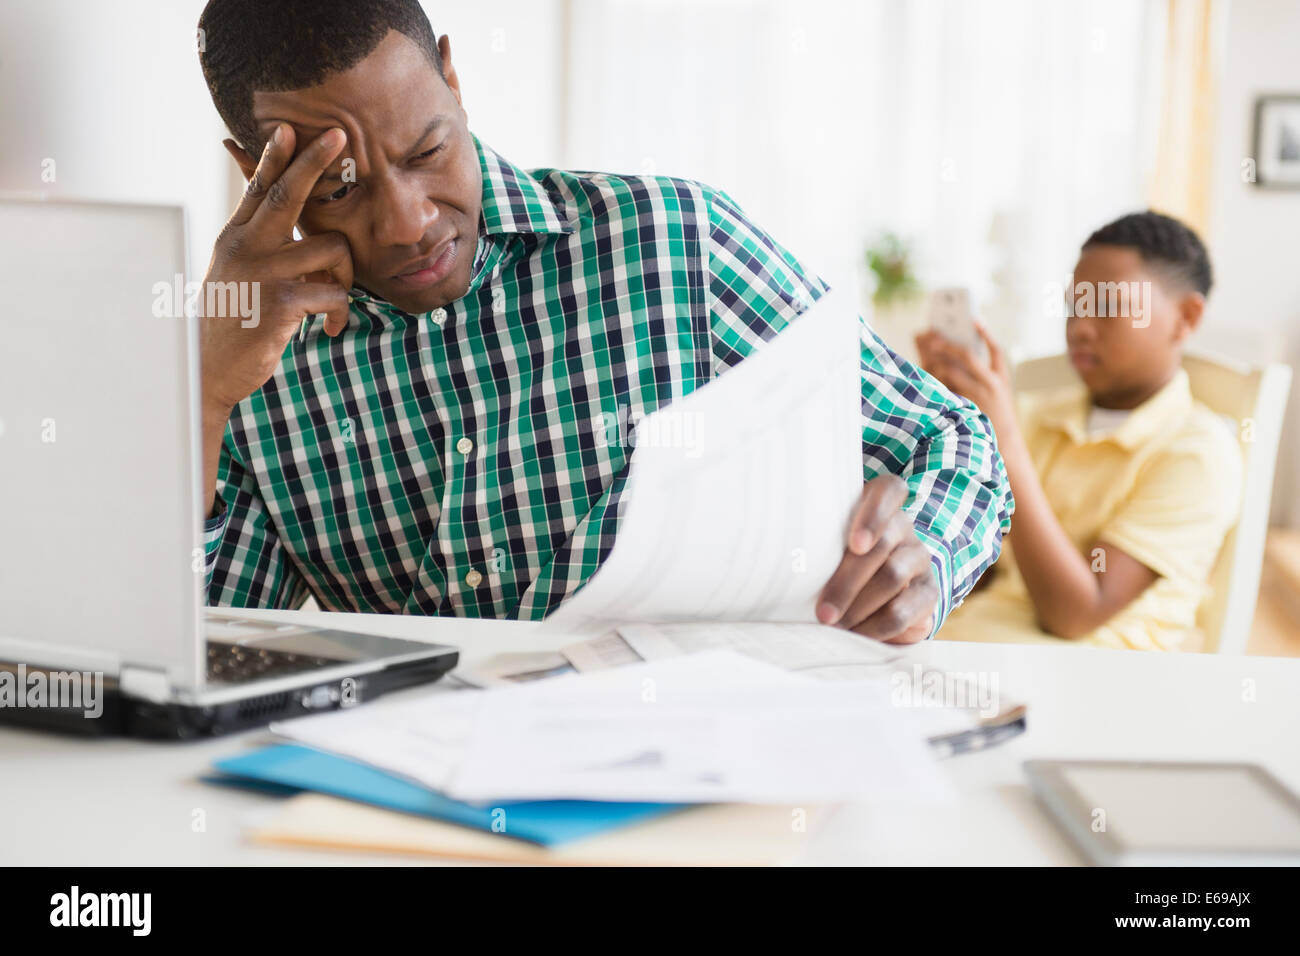 Anxious father paying bills online Stock Photo